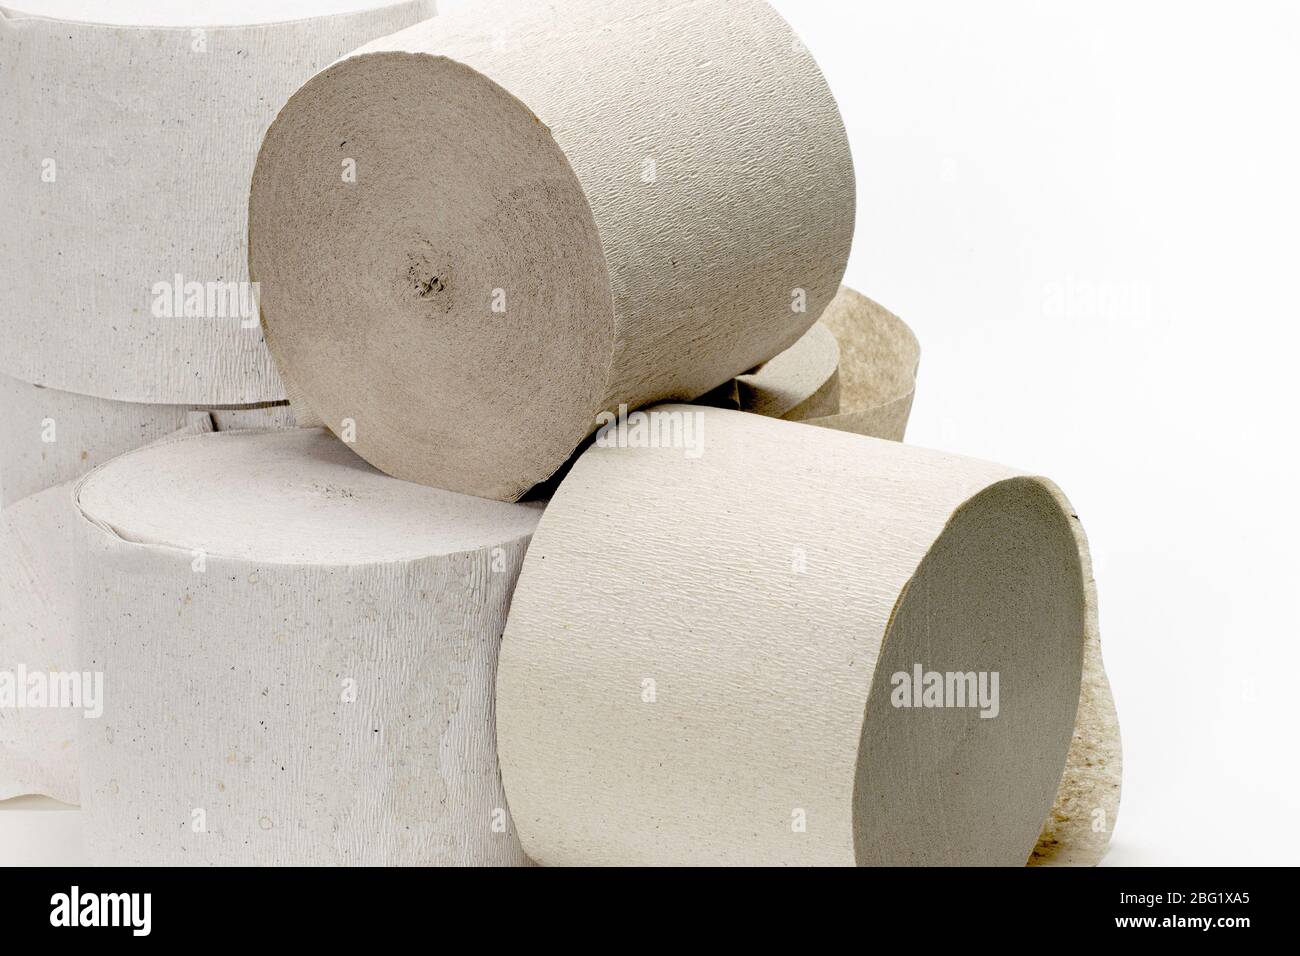 several rolls of toilet paper on a white background close-up Stock Photo